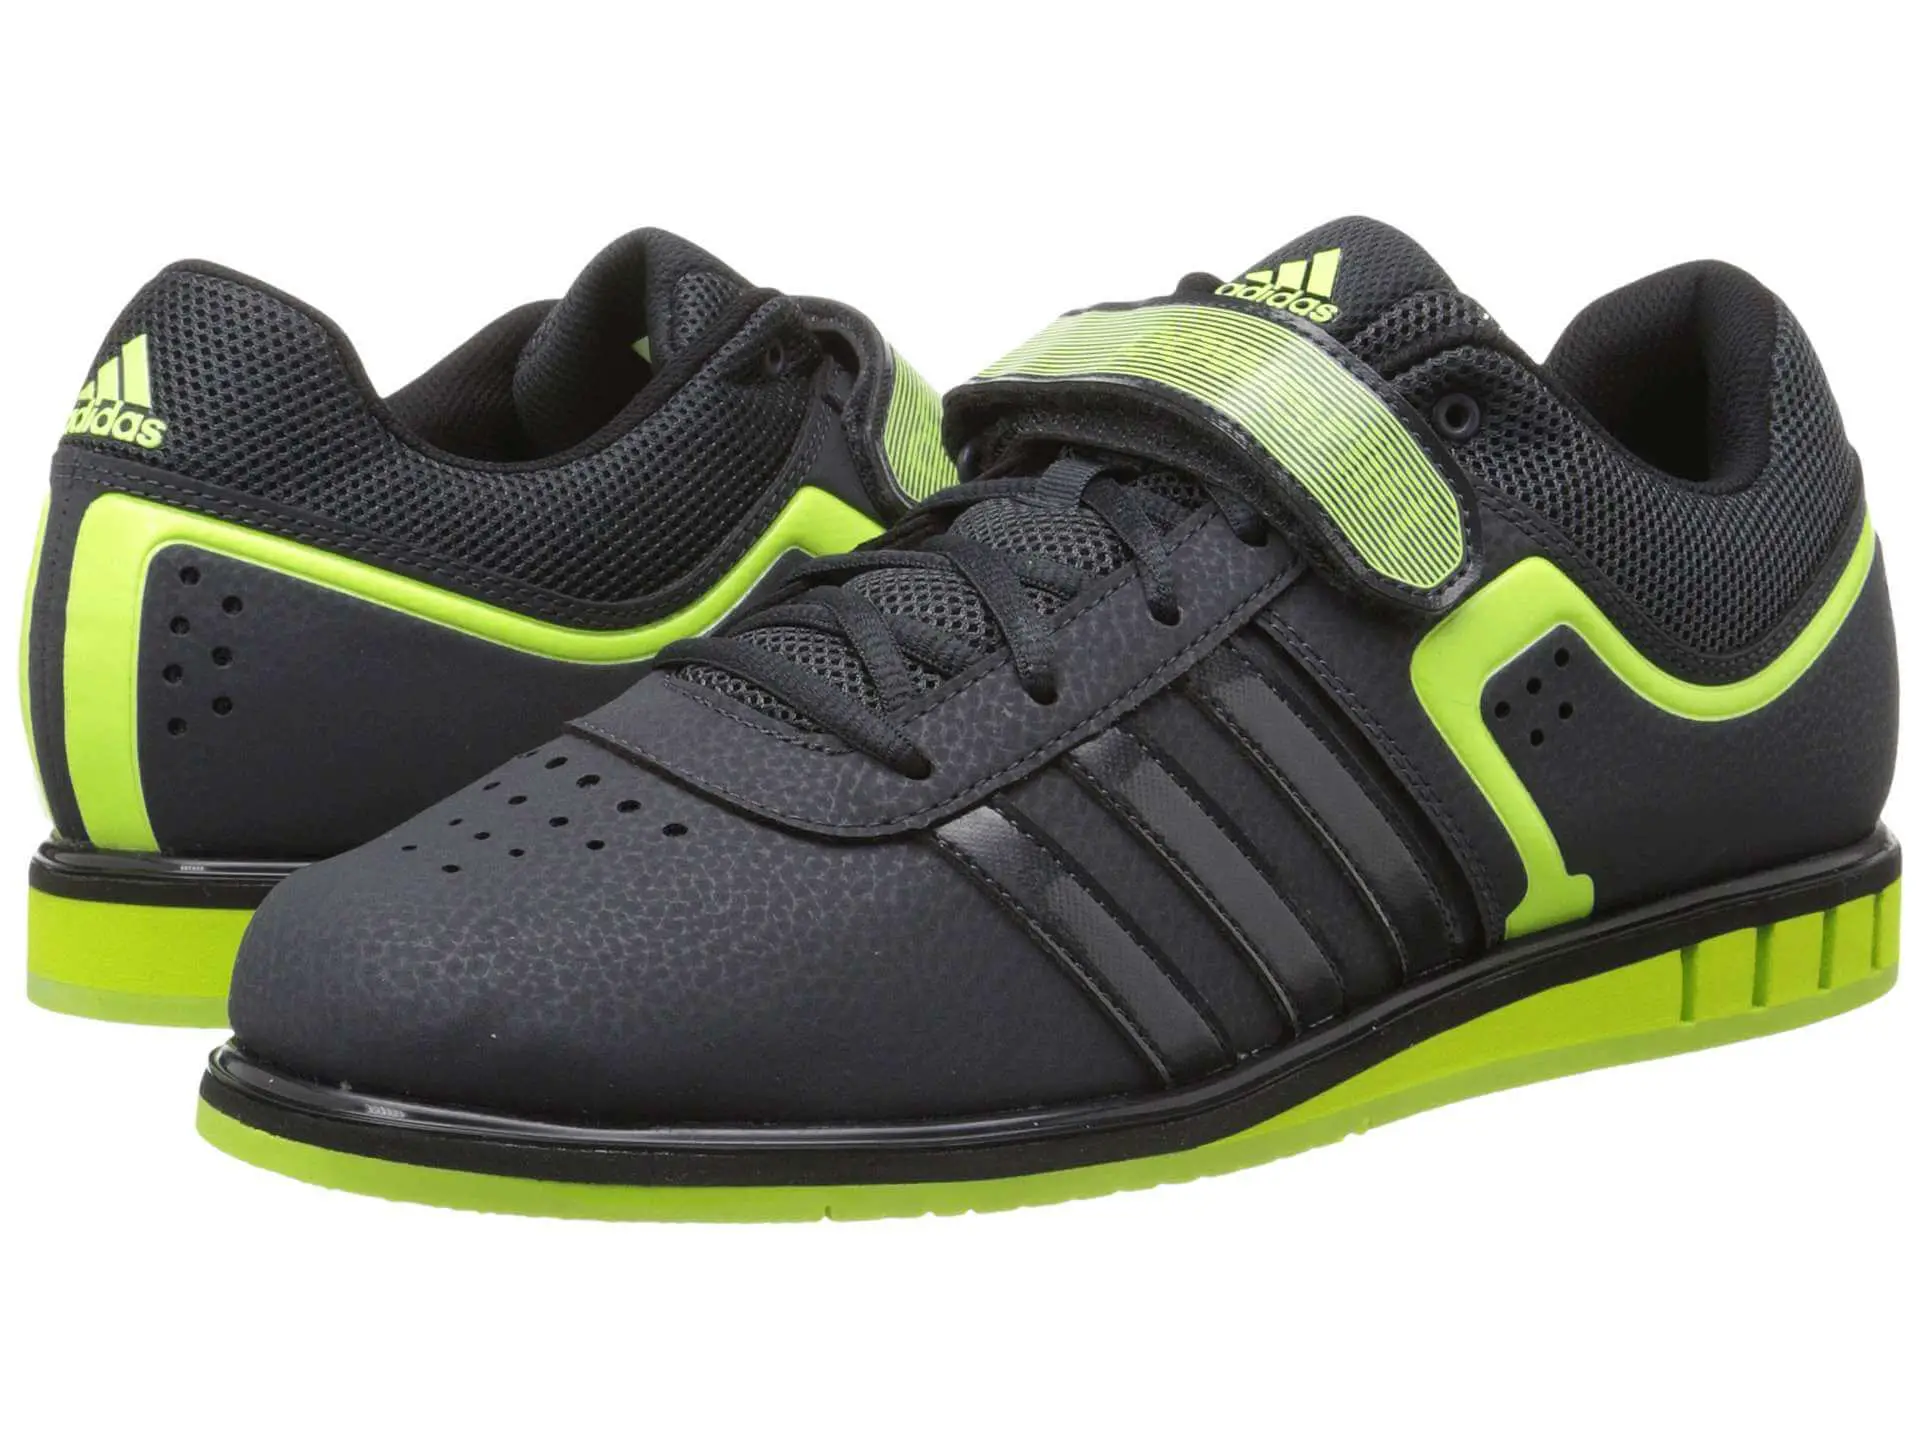 The Top 4 Best Weightlifting Shoes With Reviews